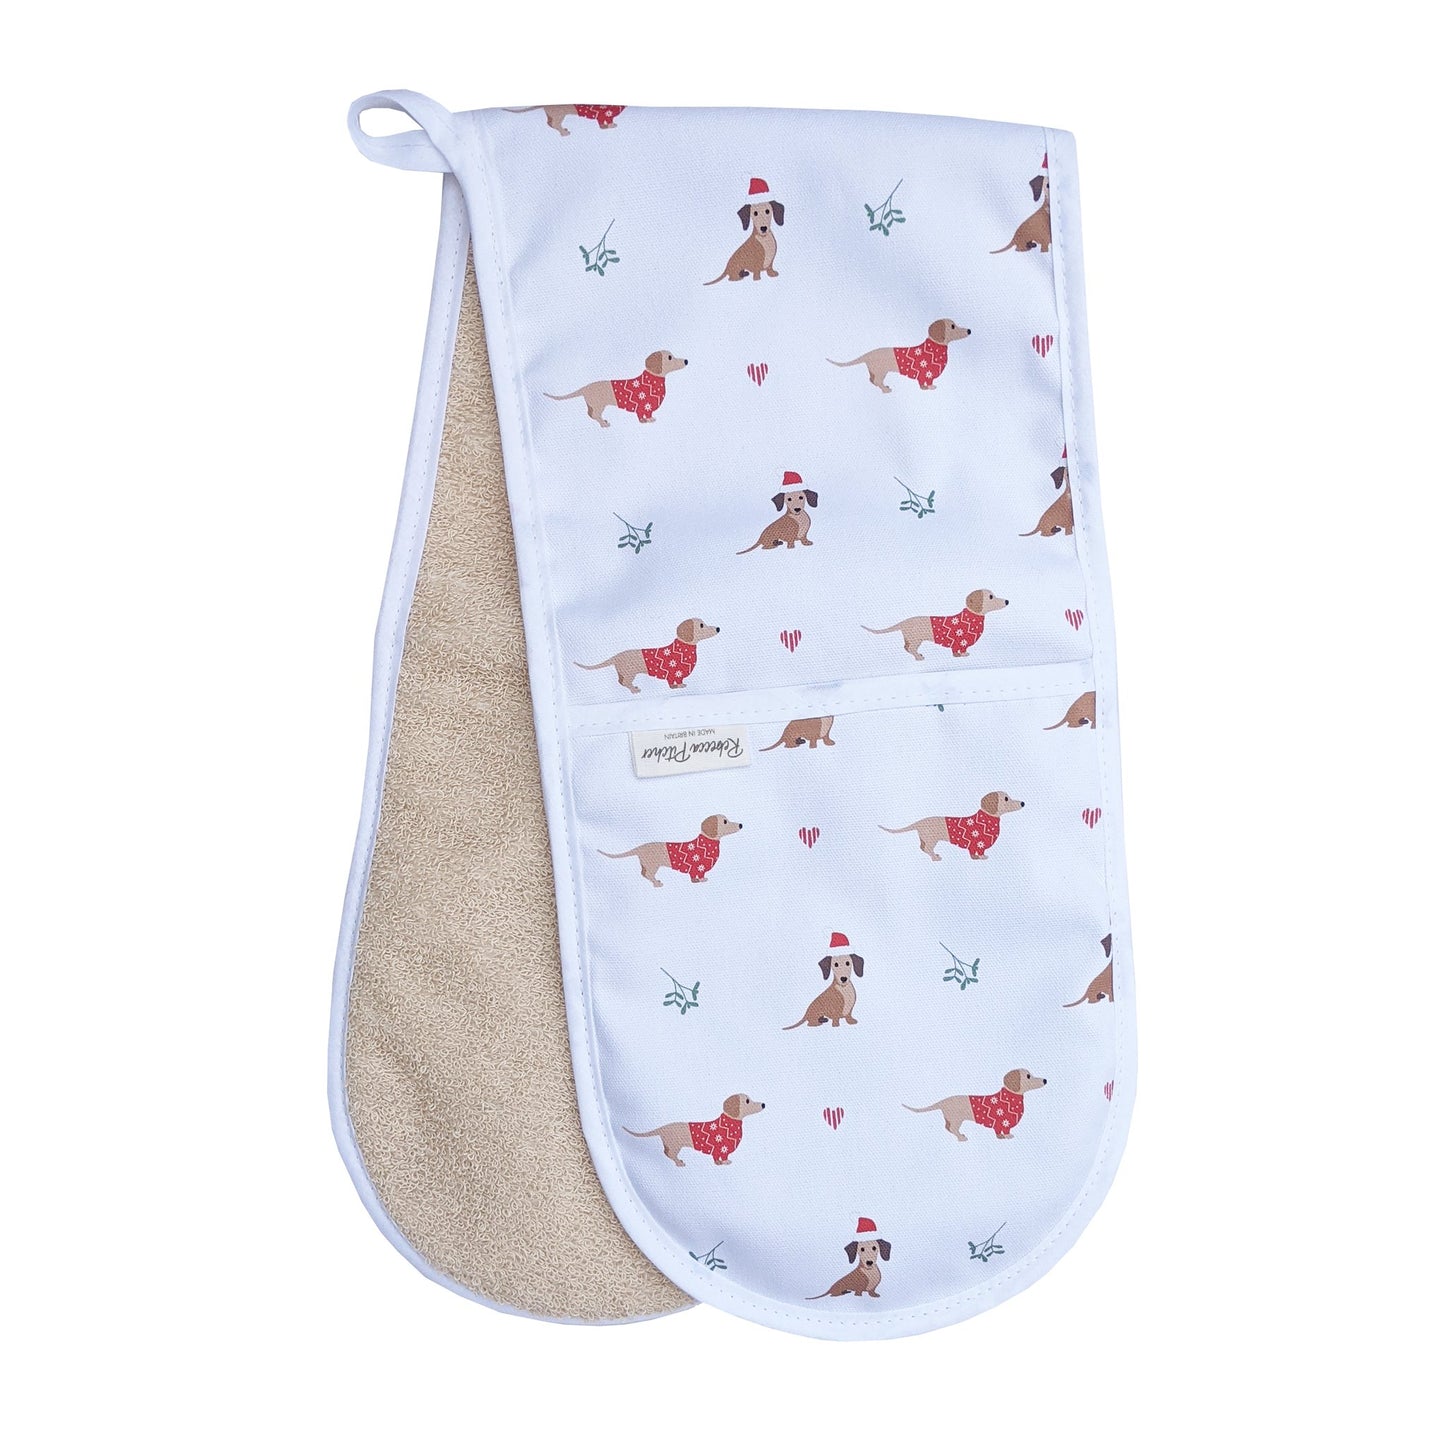 Rebecca Pitcher Double Oven Glove - 3  designs available